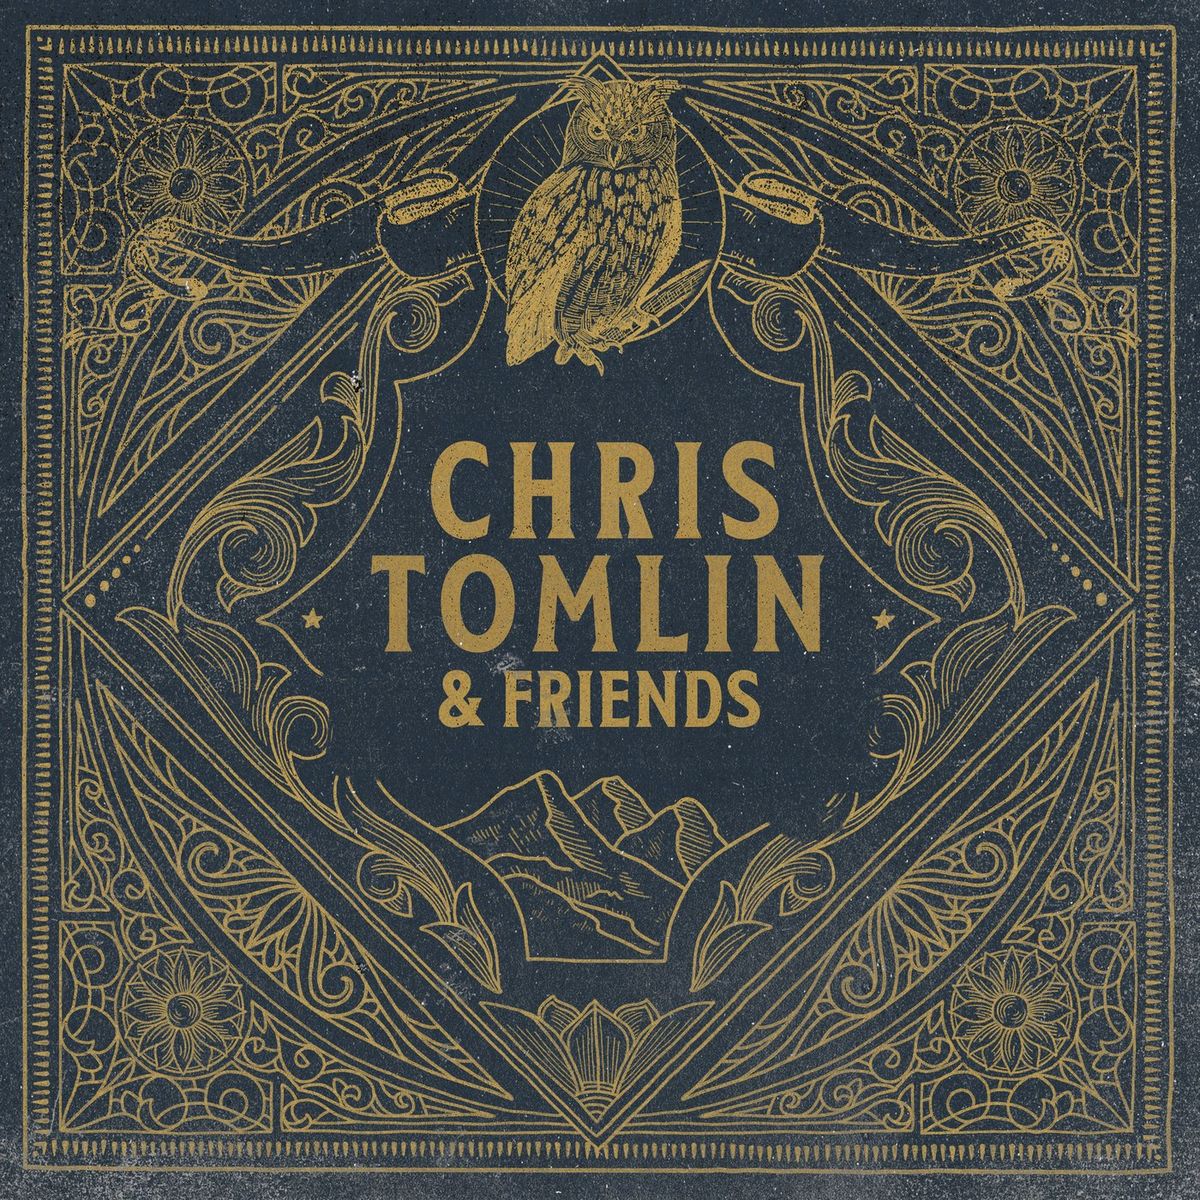 Chris Tomlin ft Lady Antebellum - Who You Are To Me